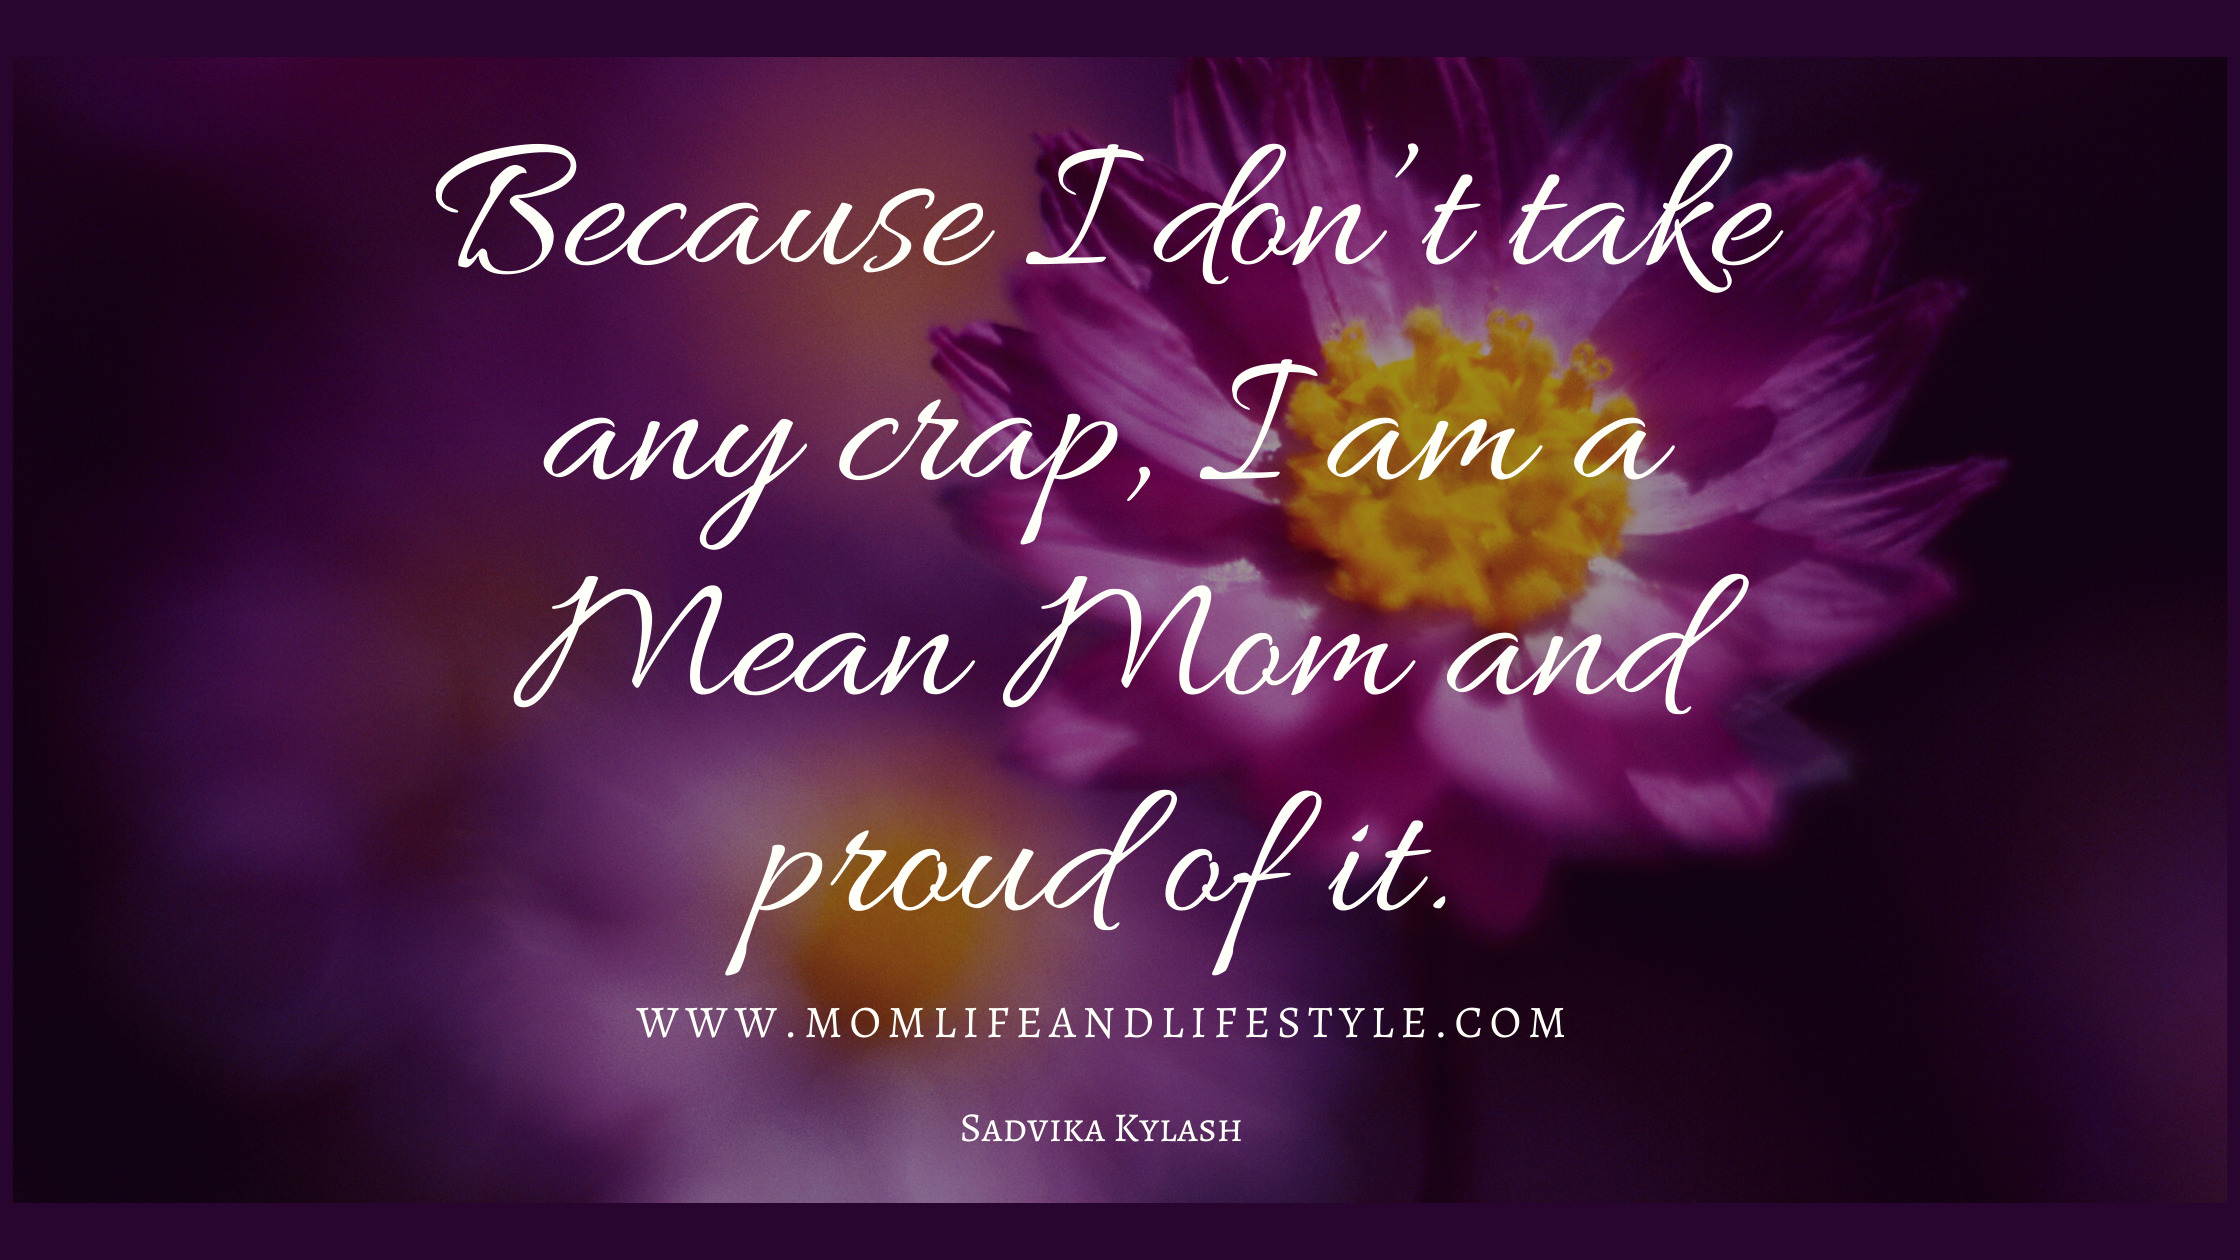 Because I don’t take any crap, I am a Mean Mom and proud of it.